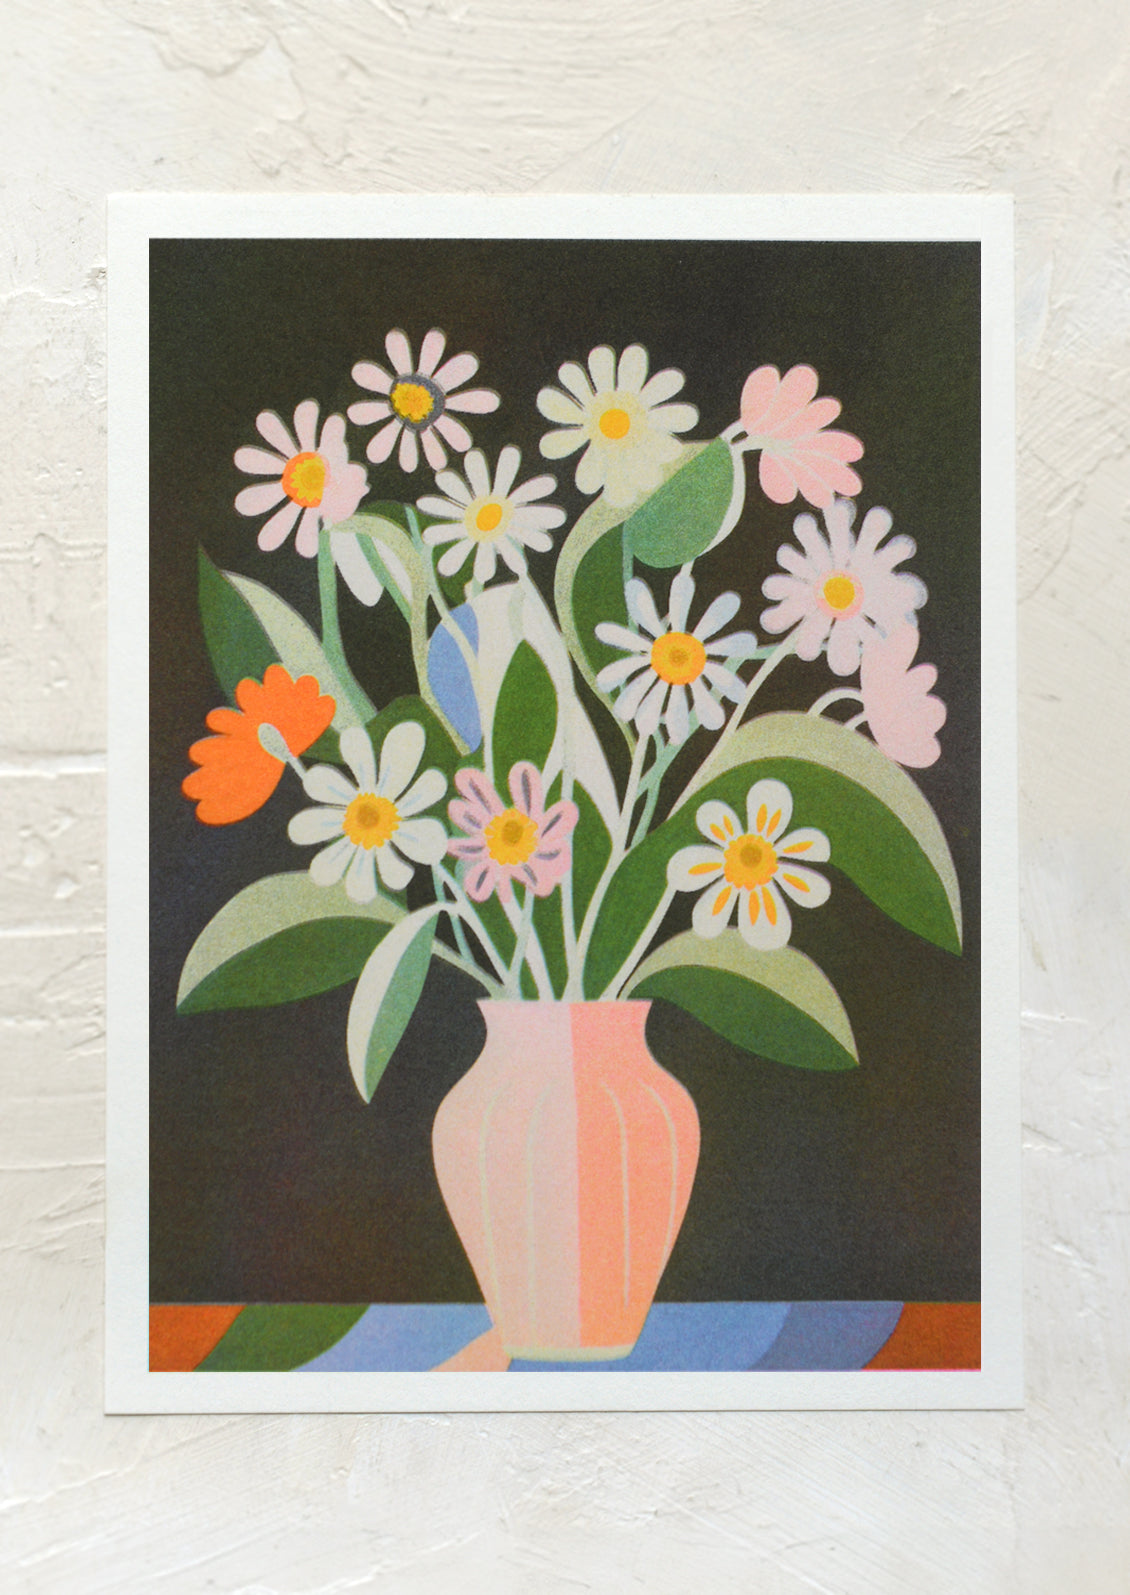 An art print with vase of colorful flowers on black background.